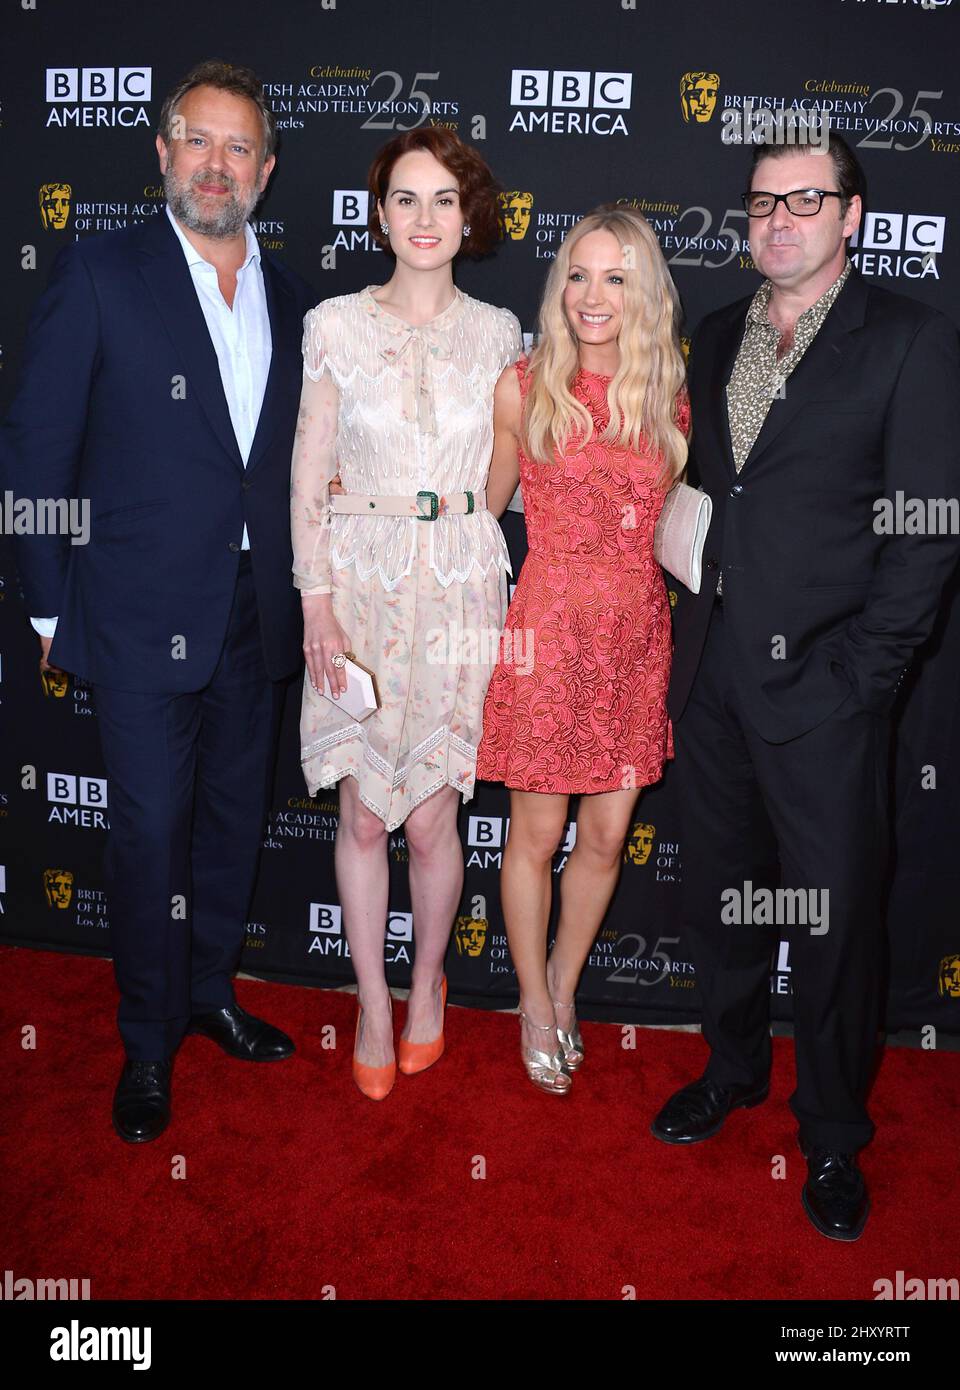 Hugh Bonneville, Michelle Dockery, Joanne Froggatt and Brendan Coyle during the BAFTA Los Angeles TV Tea 2012 Presented By BBC America held at The London Hotel in West Hollywood, California Stock Photo